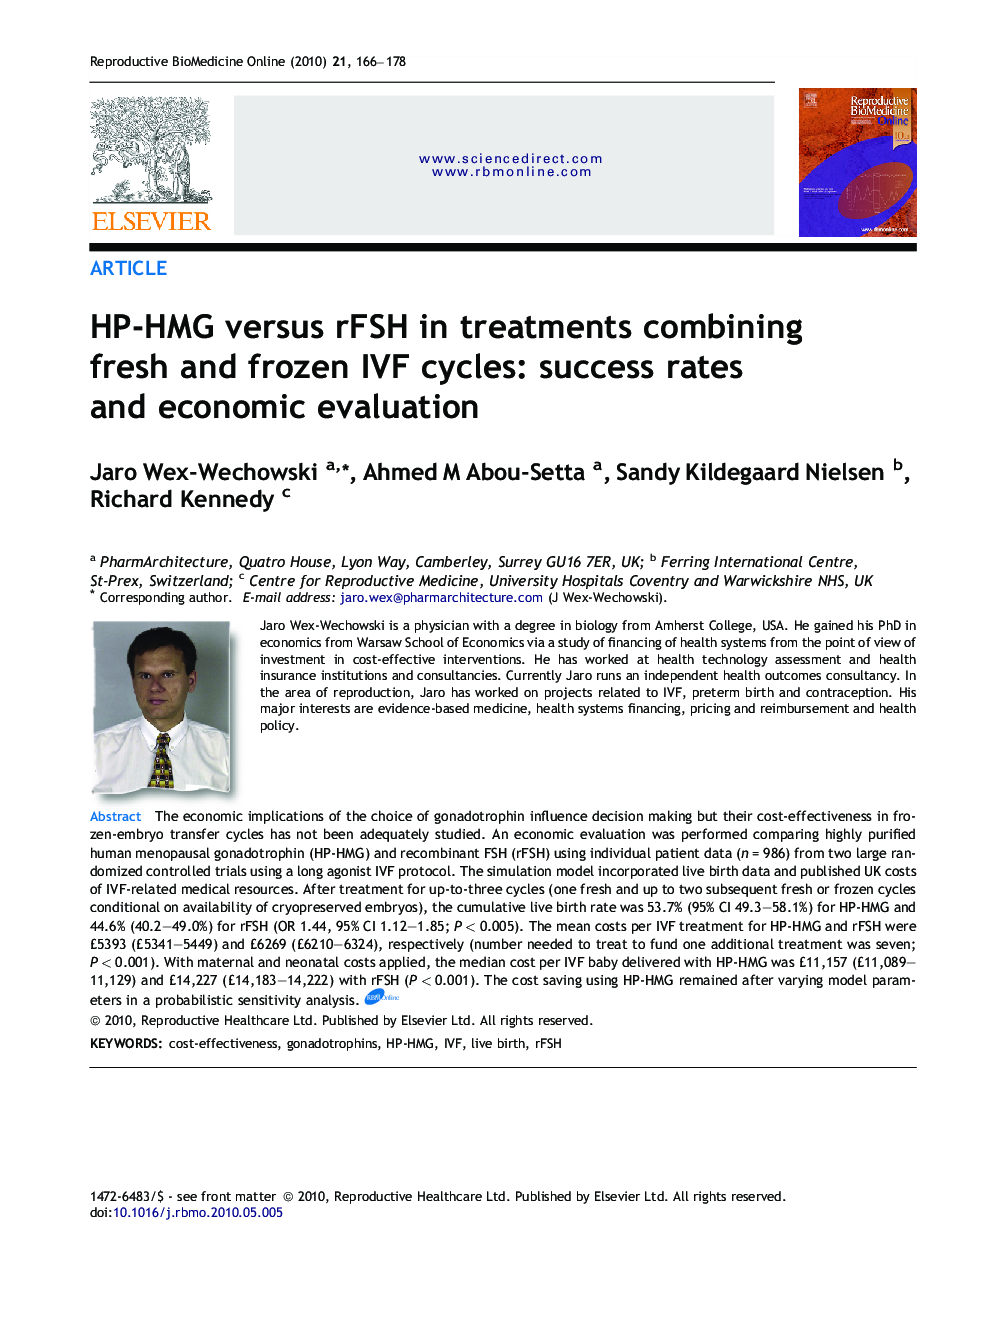 HP-HMG versus rFSH in treatments combining fresh and frozen IVF cycles: success rates and economic evaluation 